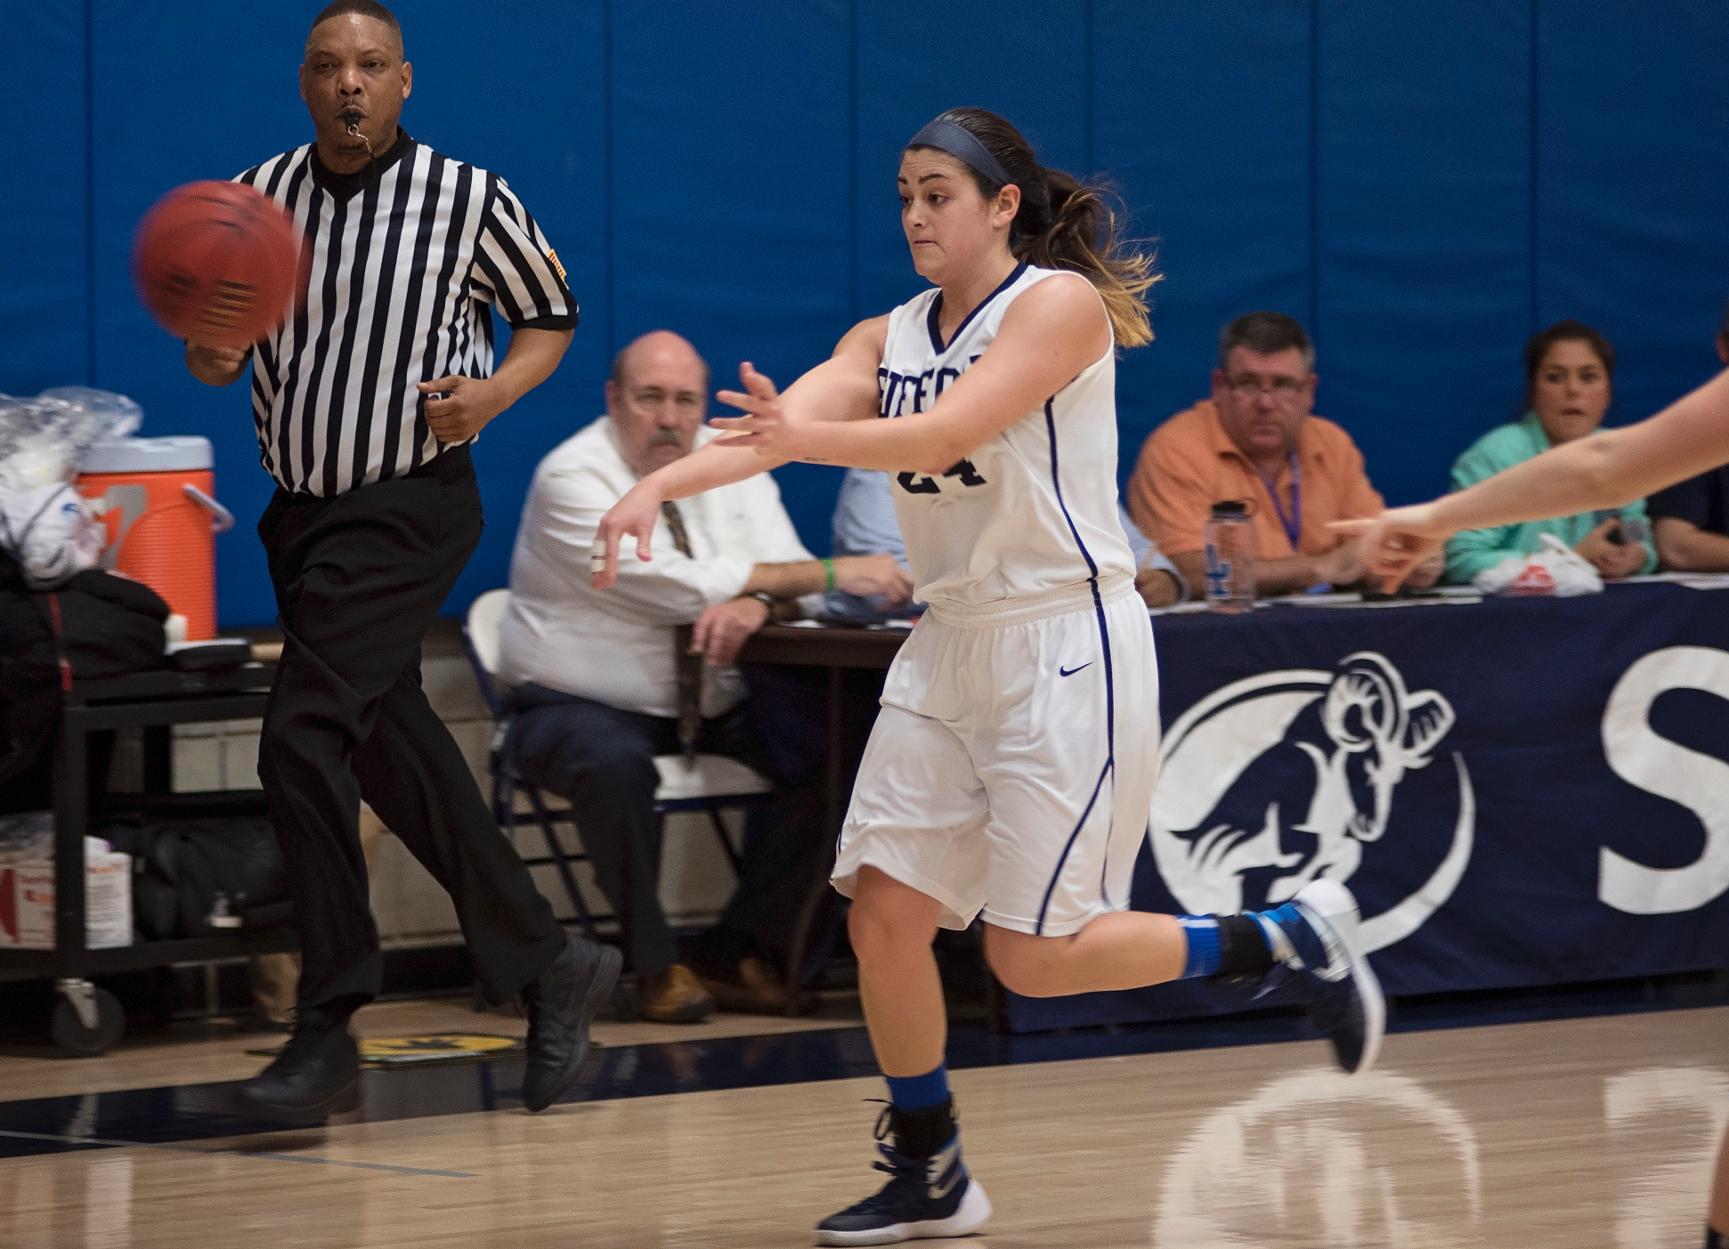 Women’s Basketball Welcomes Framingham State for Home Opener Saturday